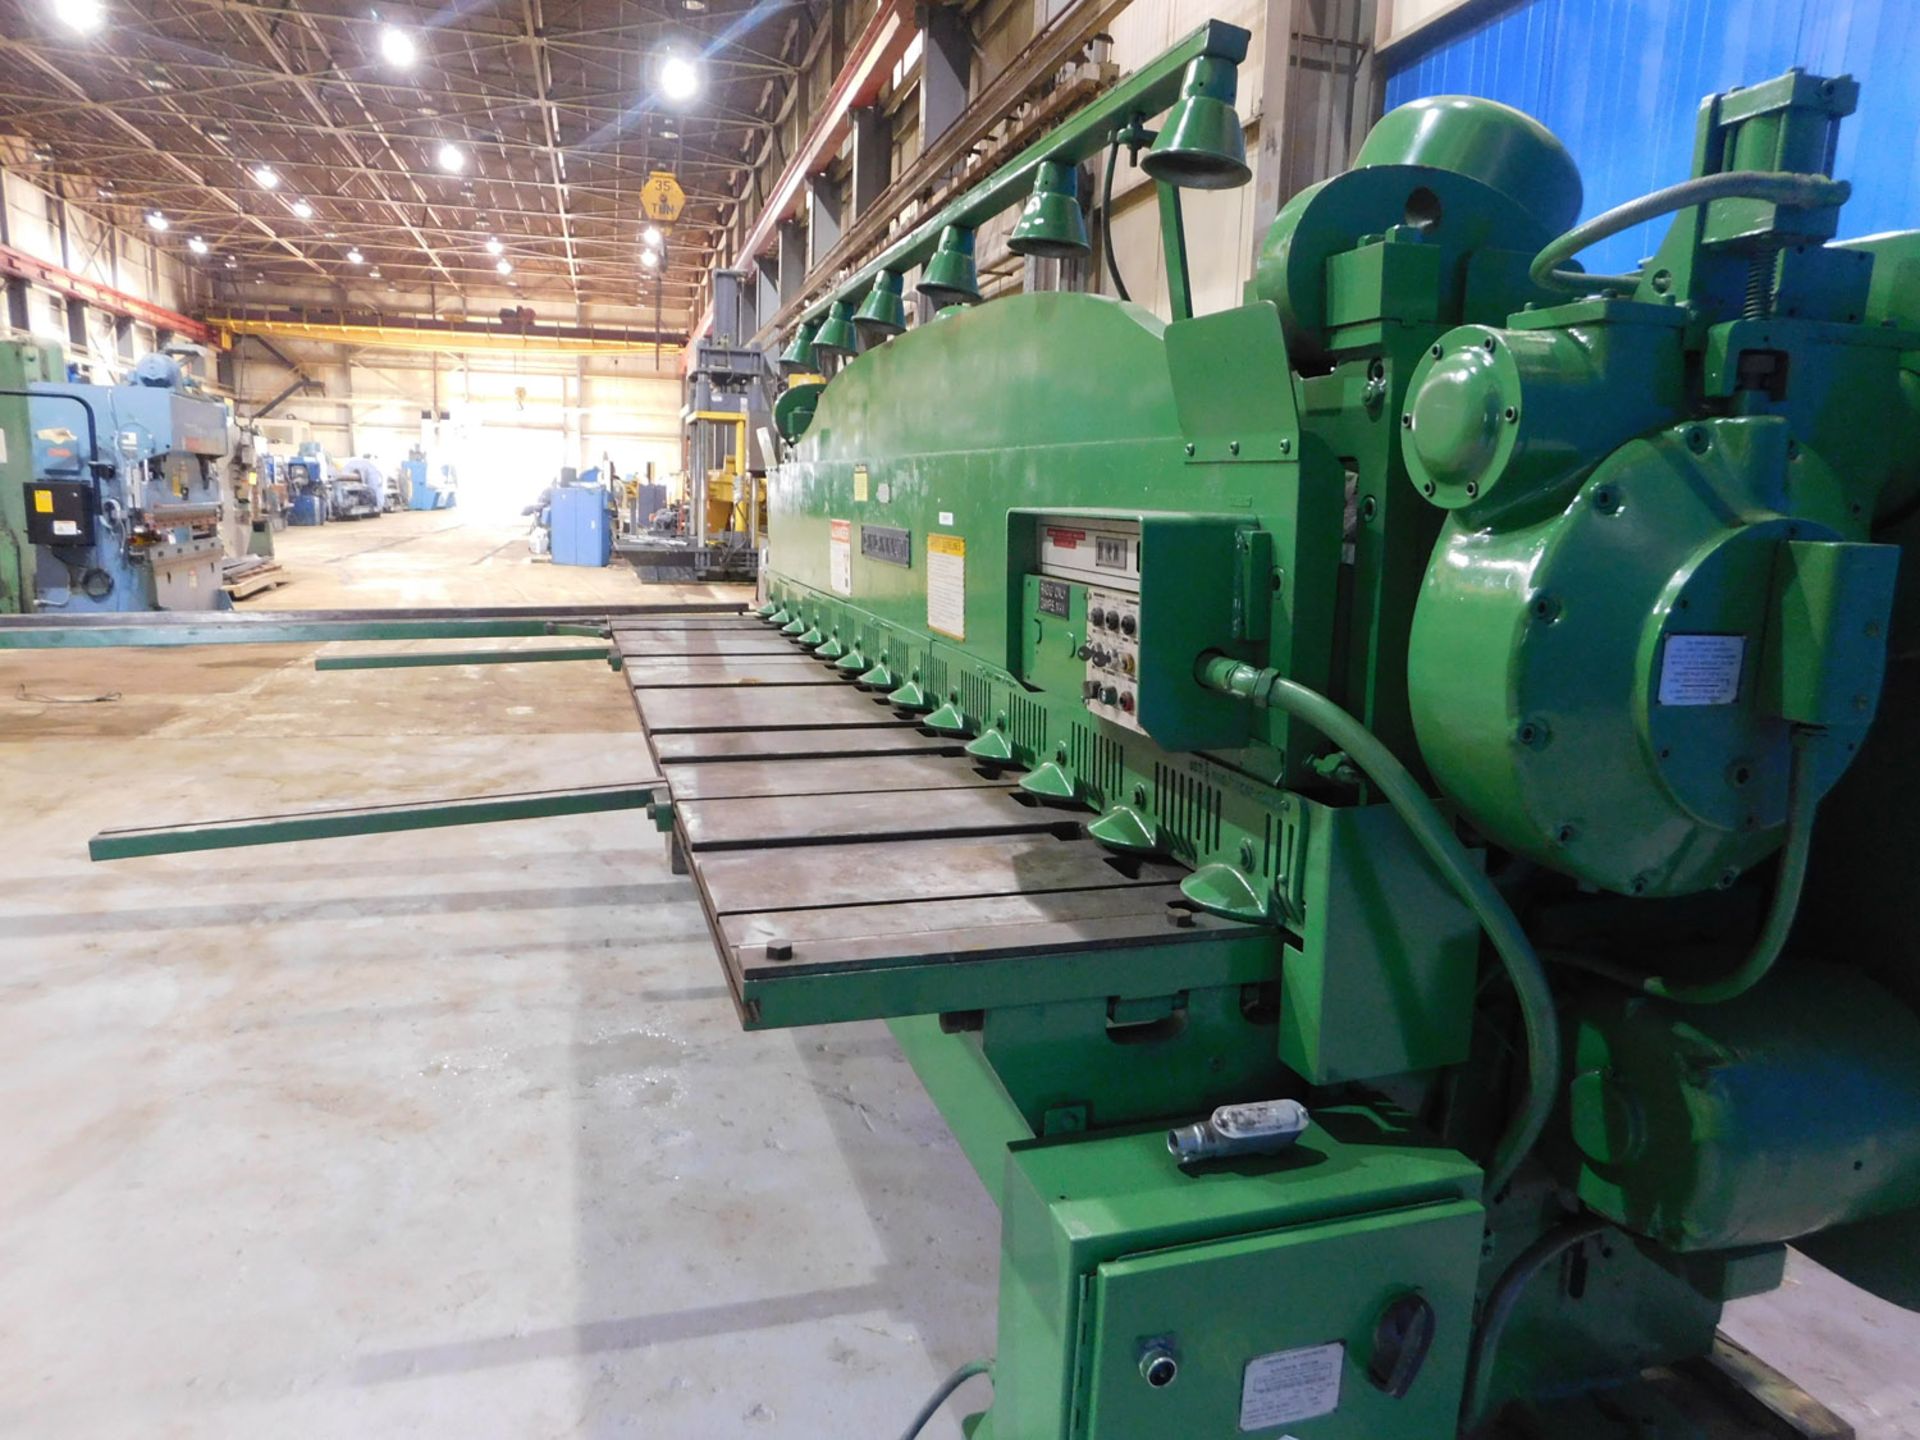 Cincinnati Power Shear, 1/4" x 12', Mdl: 2CC12, S/N: 44341 (5991P) (Located In Painesville, OH) - Image 7 of 8